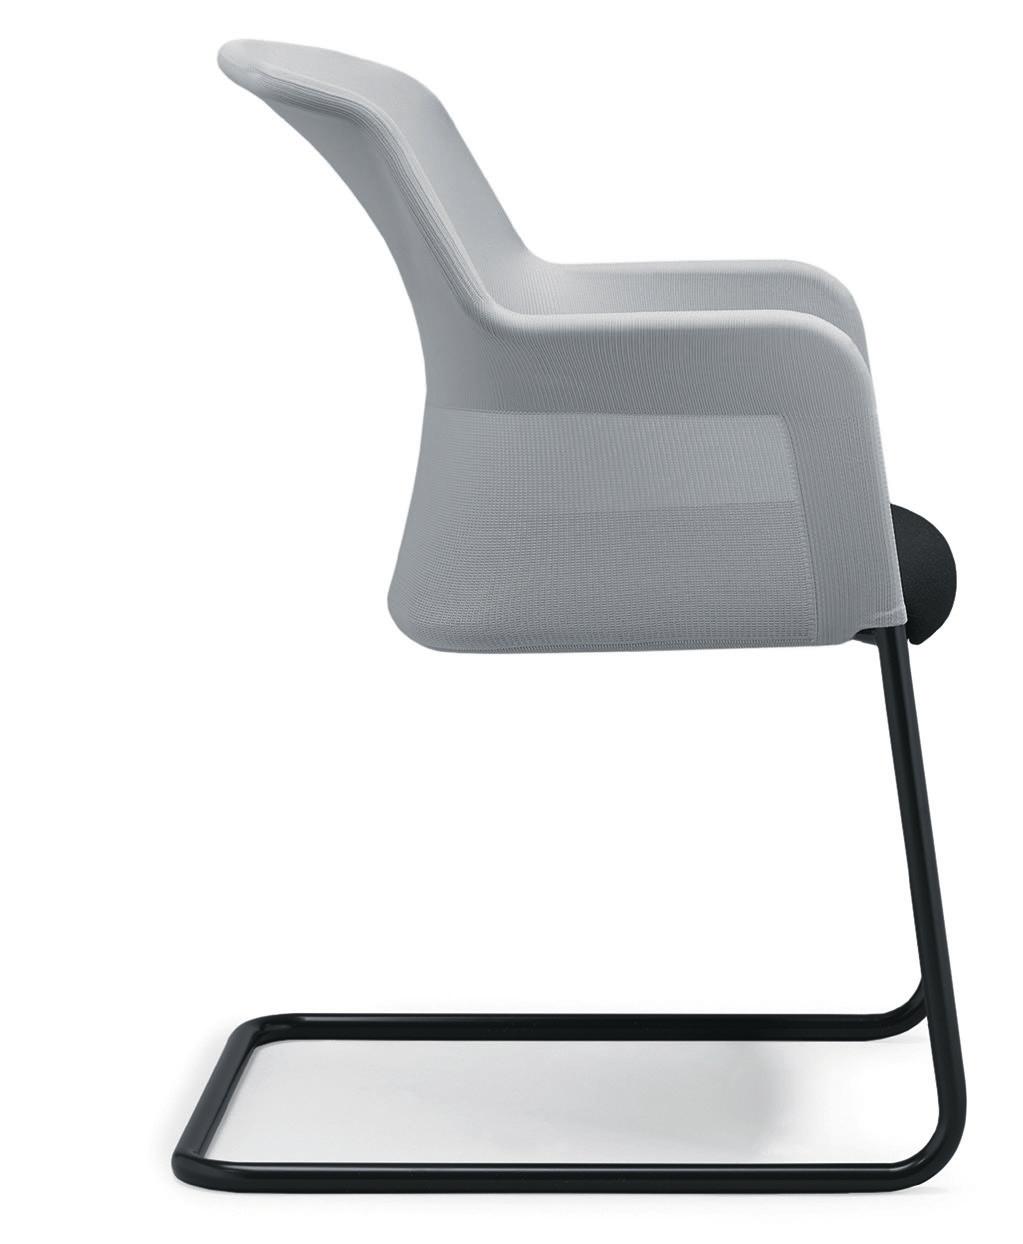 VISITOR S CHAIR SEDIA VISITATORE Visiting on an aesthete. The giroflex 434 visitor s chair generously welcomes anyone and everyone.